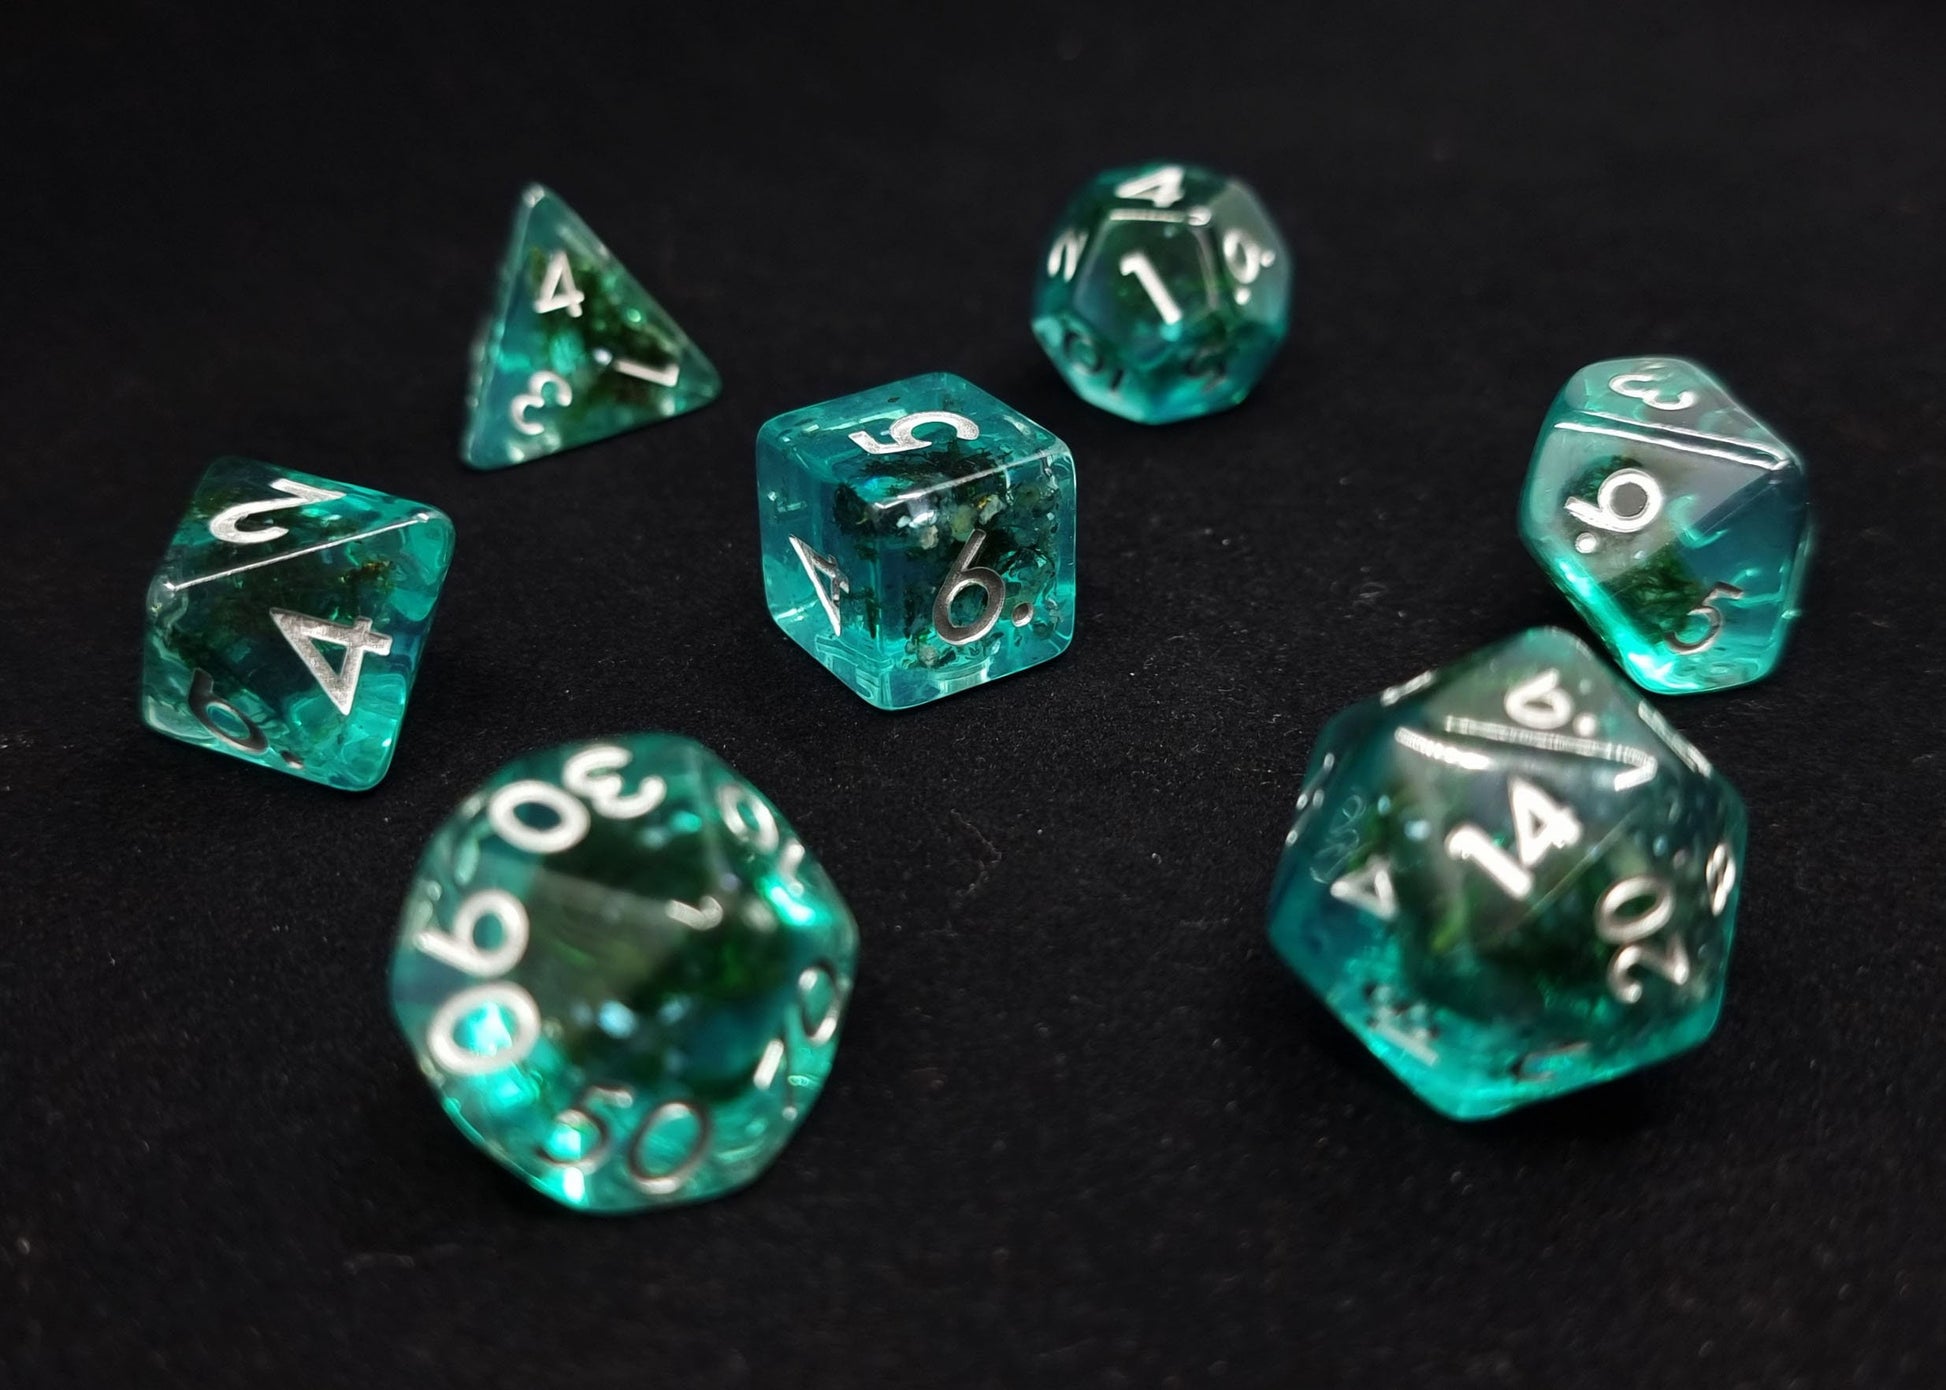 Abyssal Polyhedral Dice Set - Clear Teal Blue Dice with Dark Green "Seaweed"